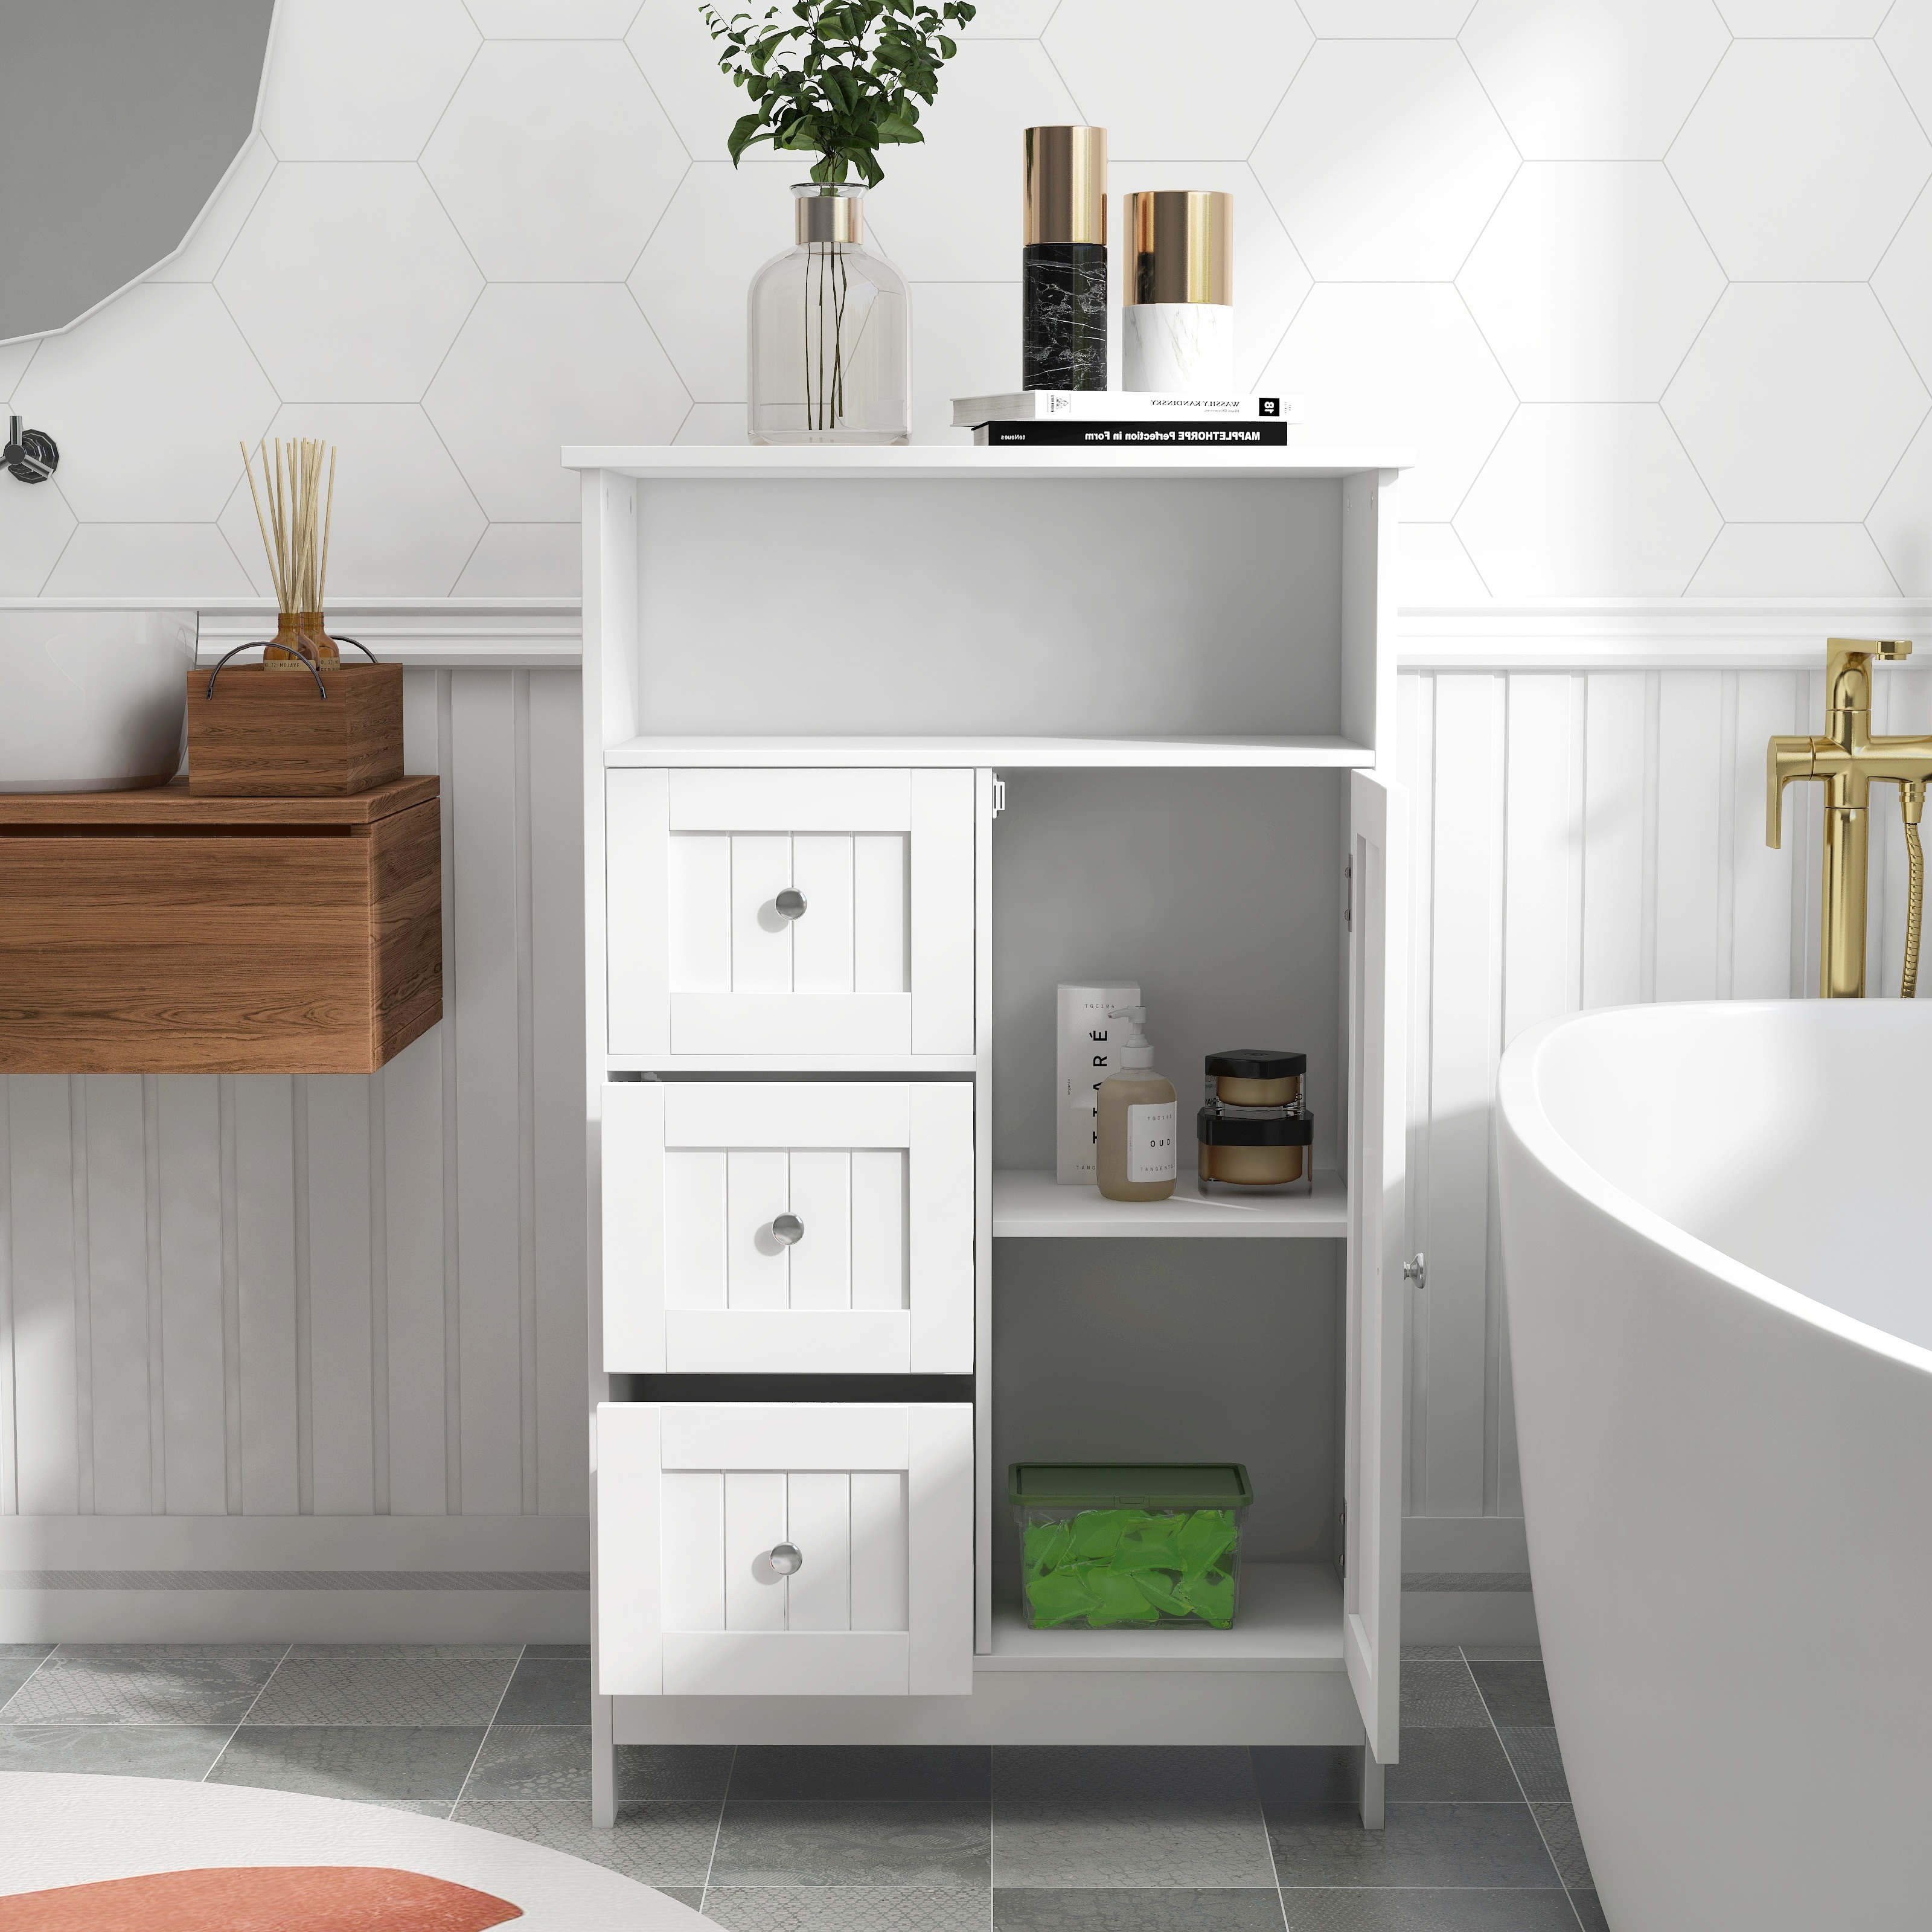 https://ak1.ostkcdn.com/images/products/is/images/direct/721abf1b2c4416fc148643dc4eaabd513ef216b9/White-Bathroom-Standing-3-Drawers-Storage-Cabinet.jpg